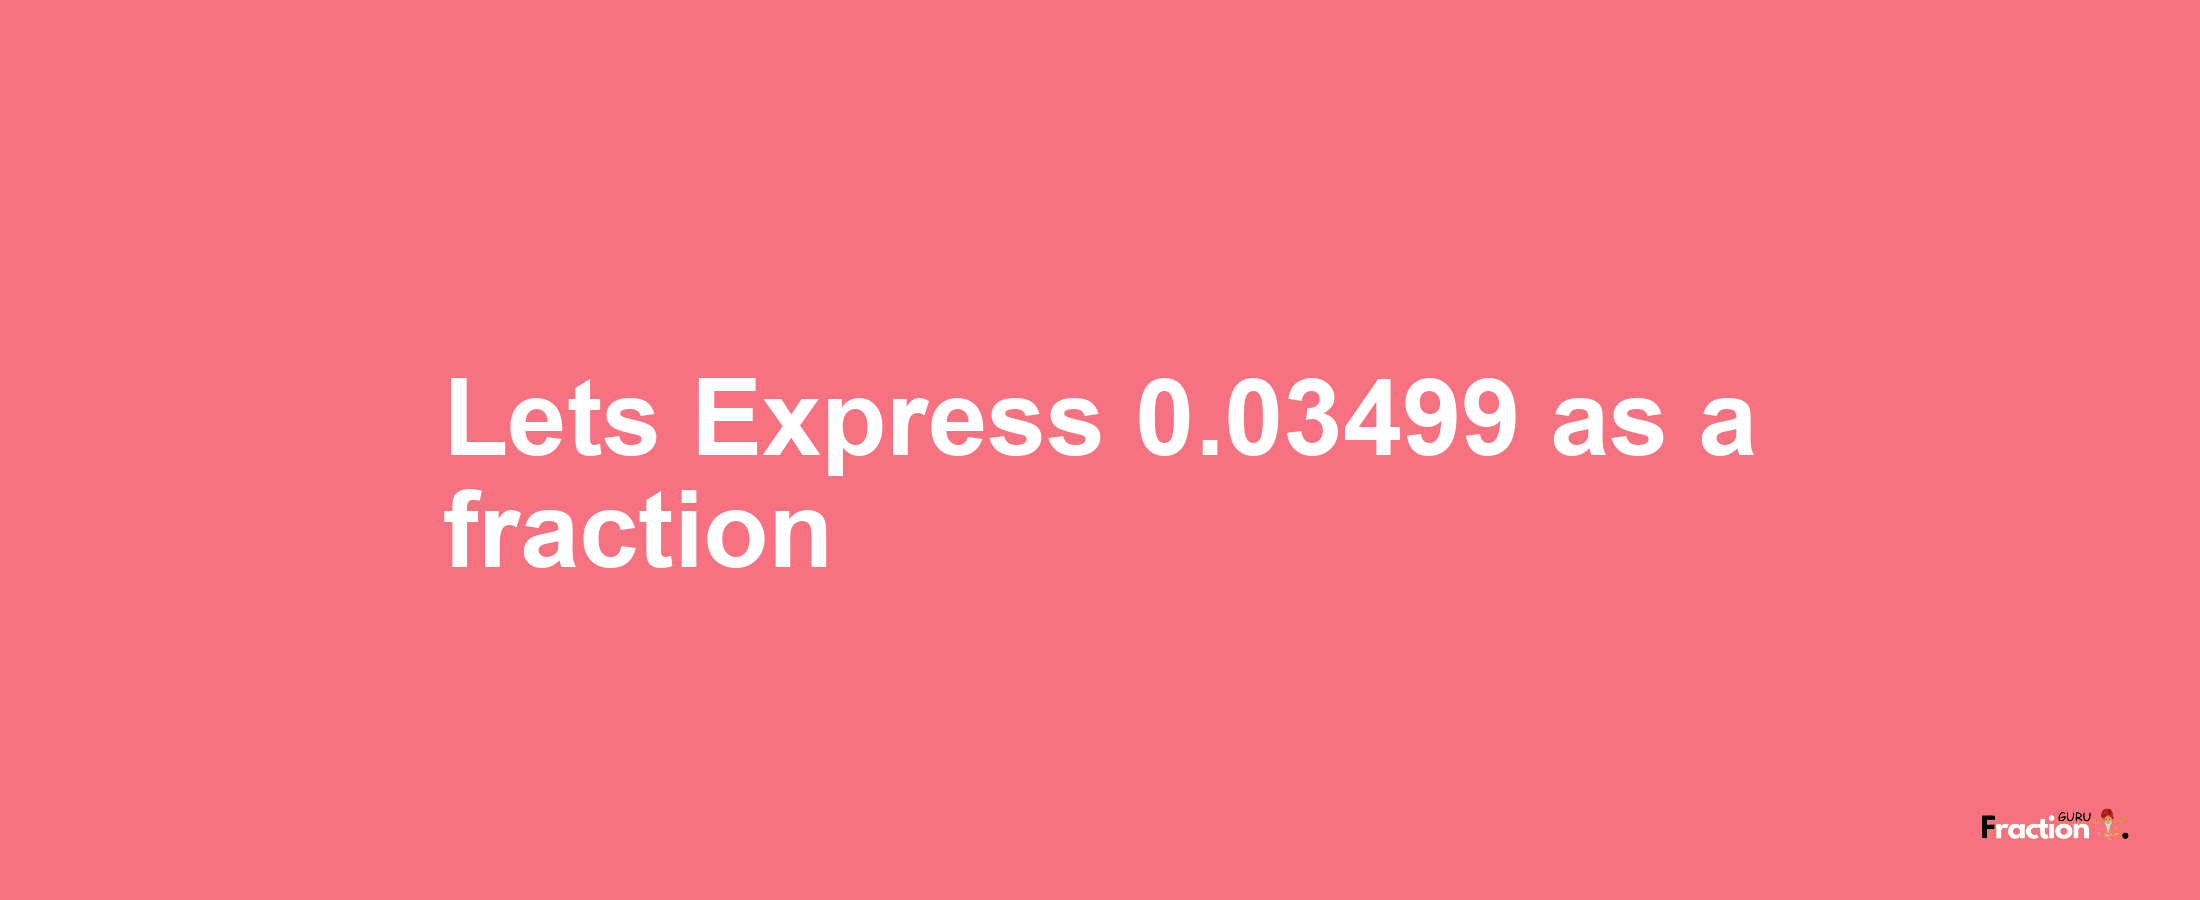 Lets Express 0.03499 as afraction